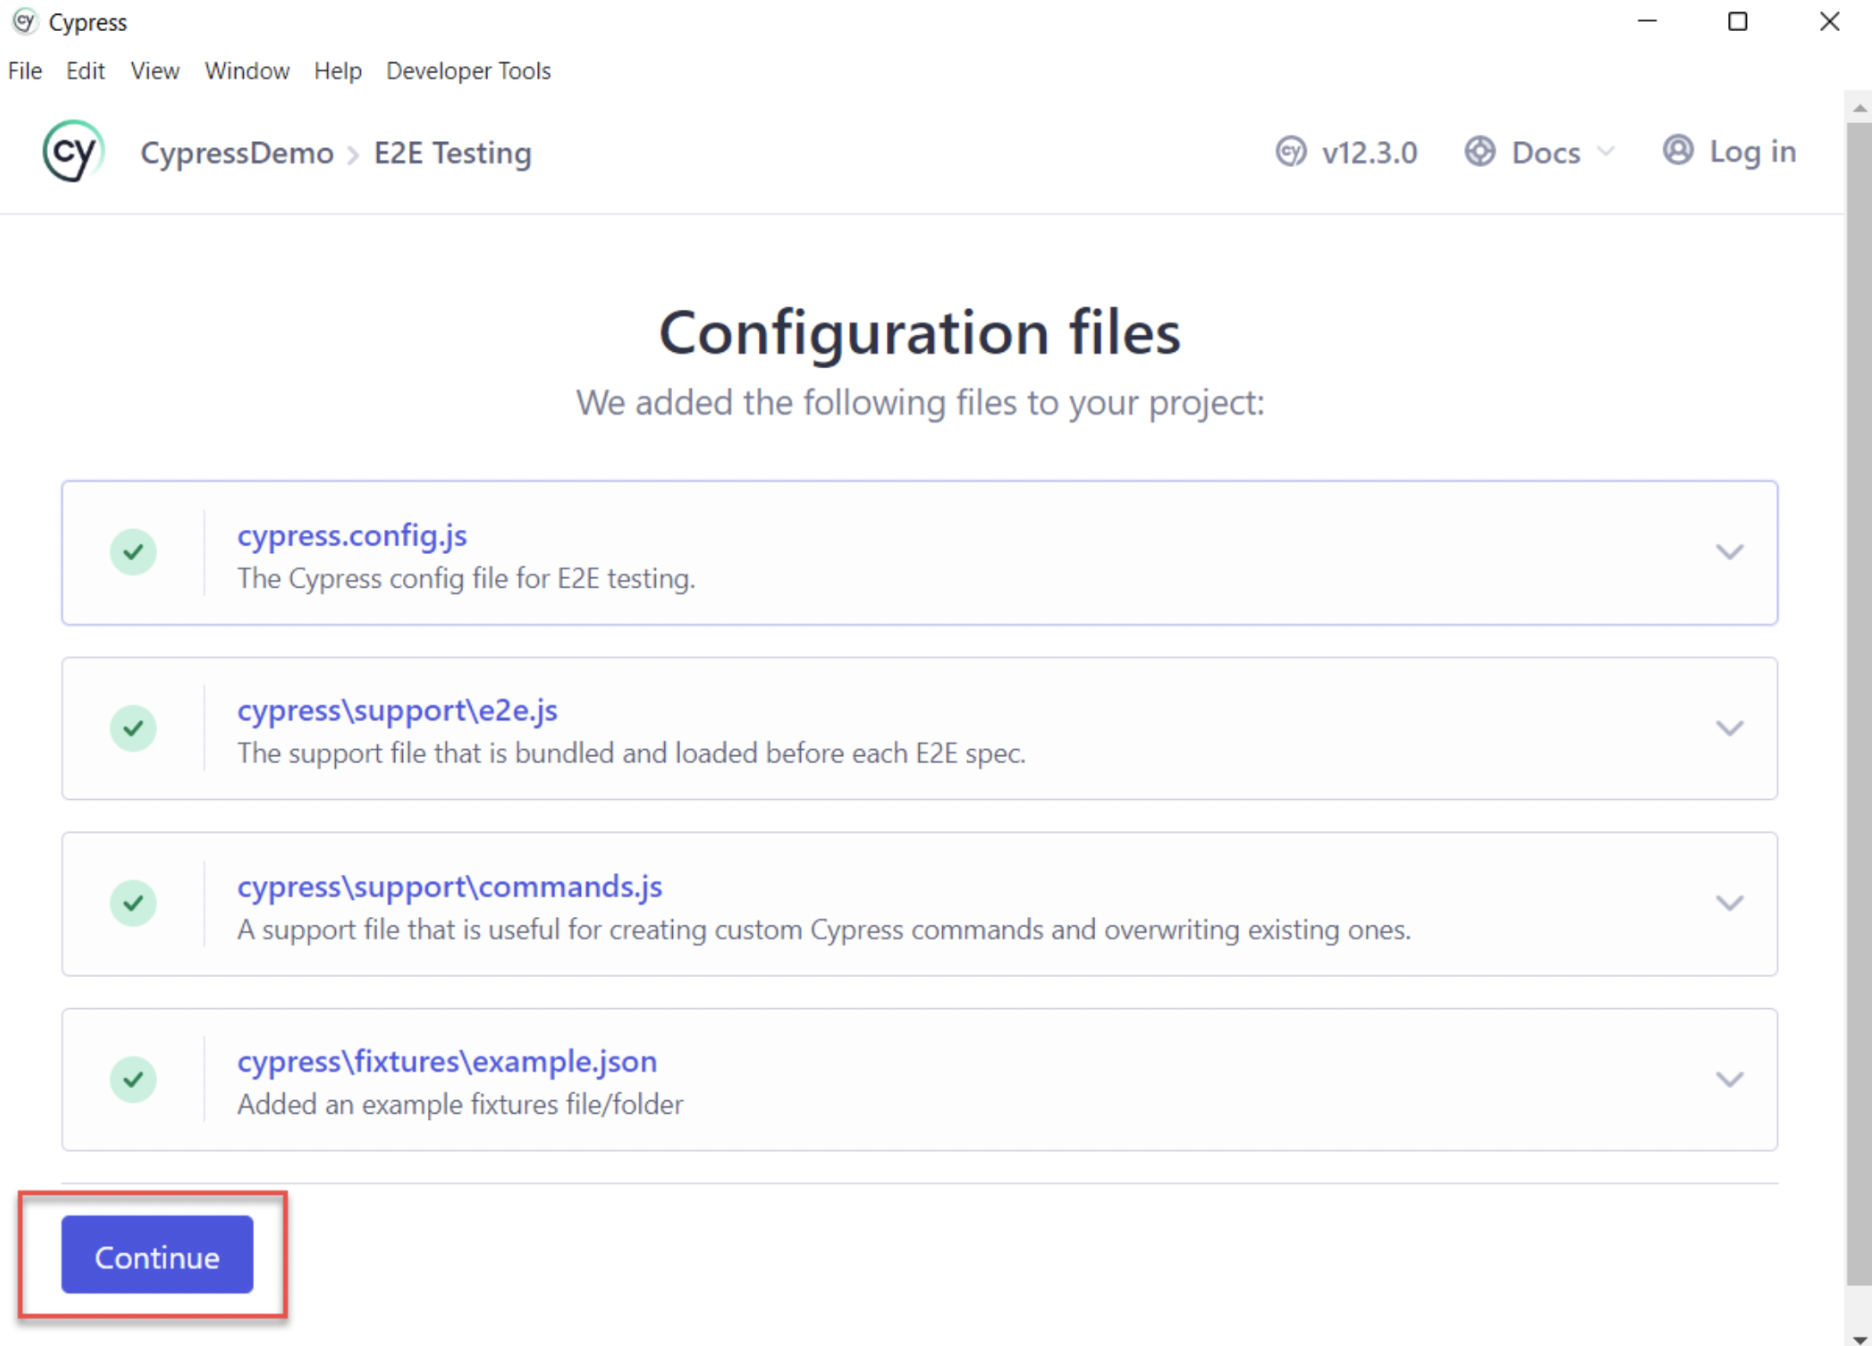 Review the Configuration File to test React in Cypress